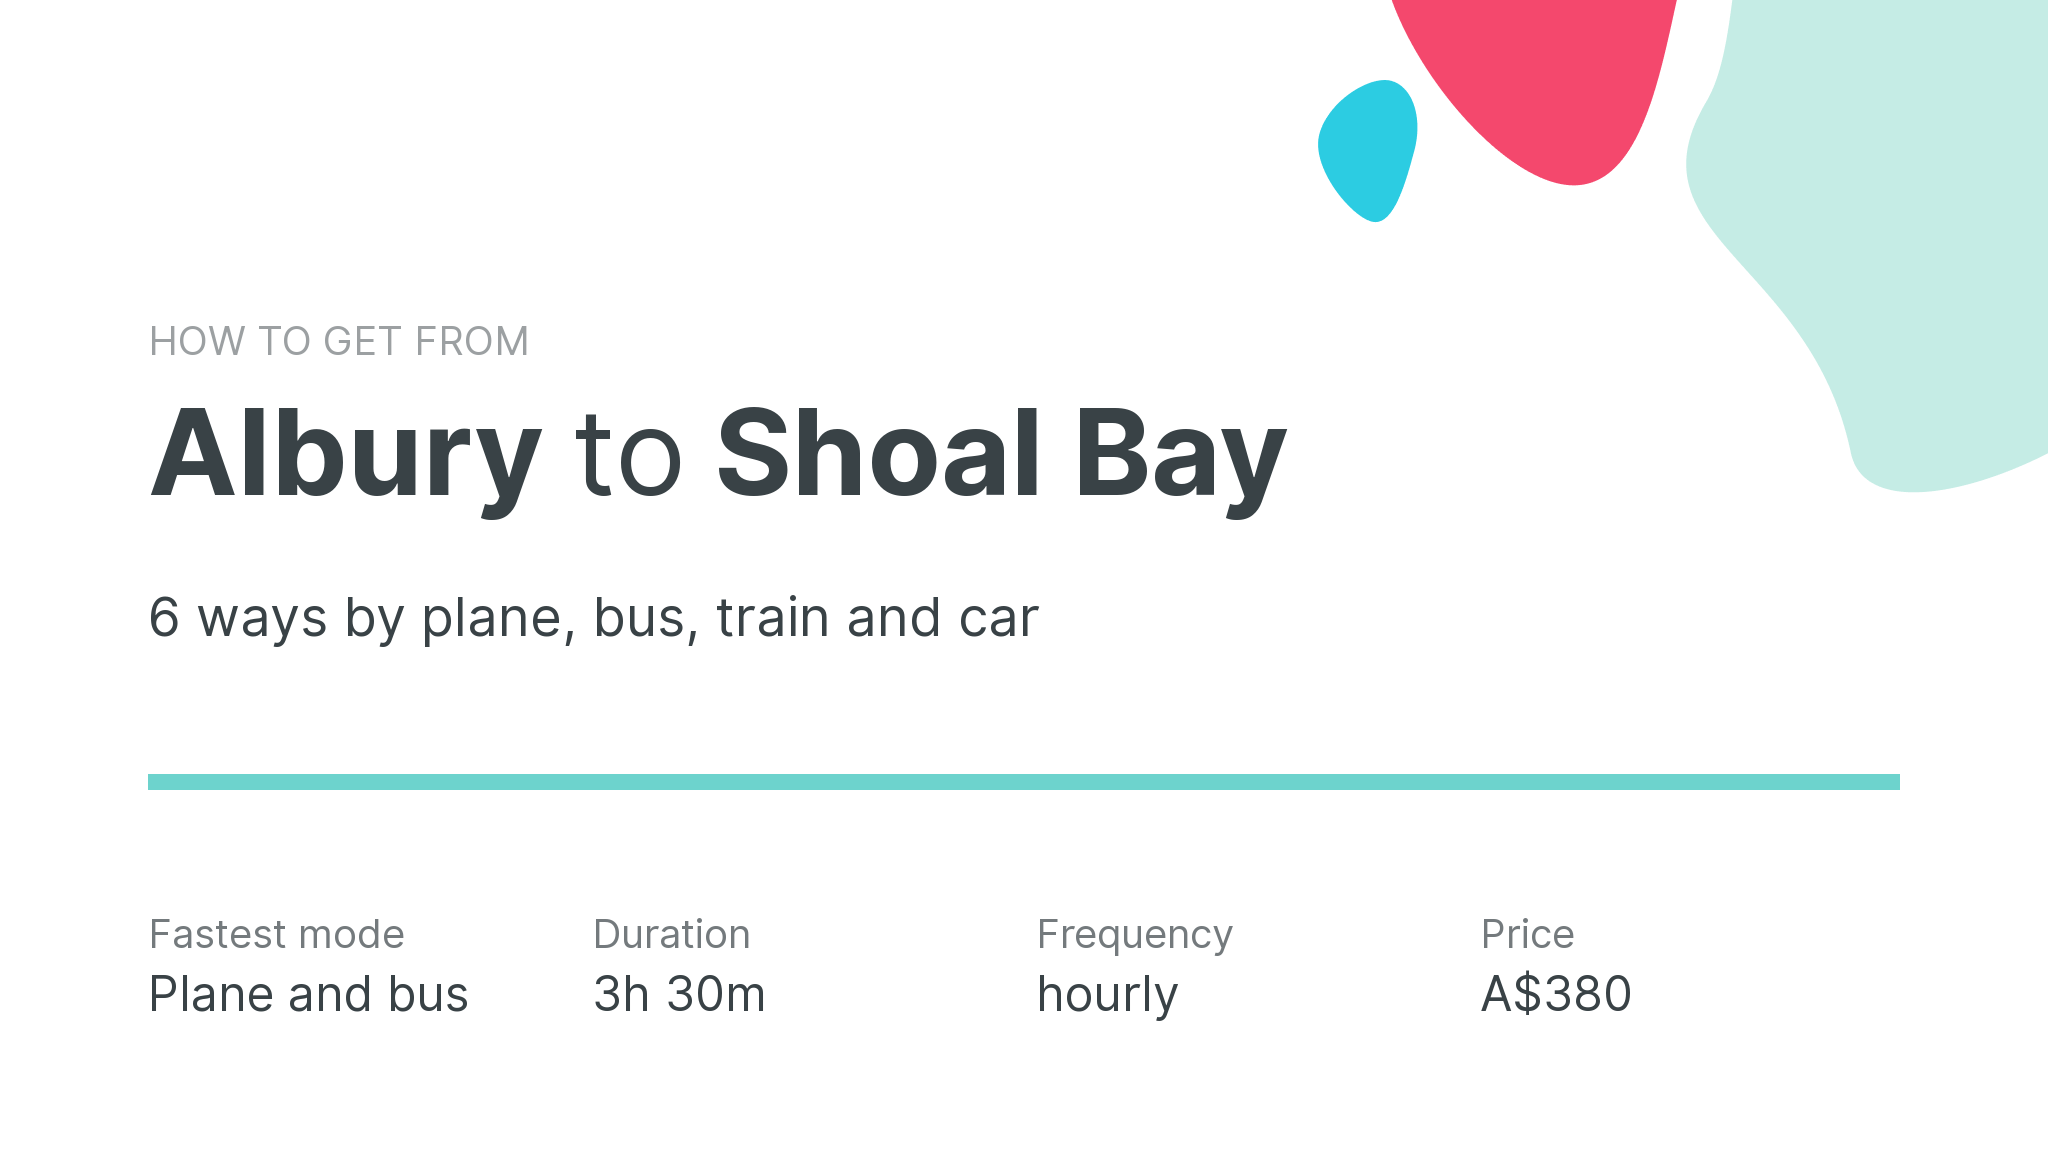 How do I get from Albury to Shoal Bay